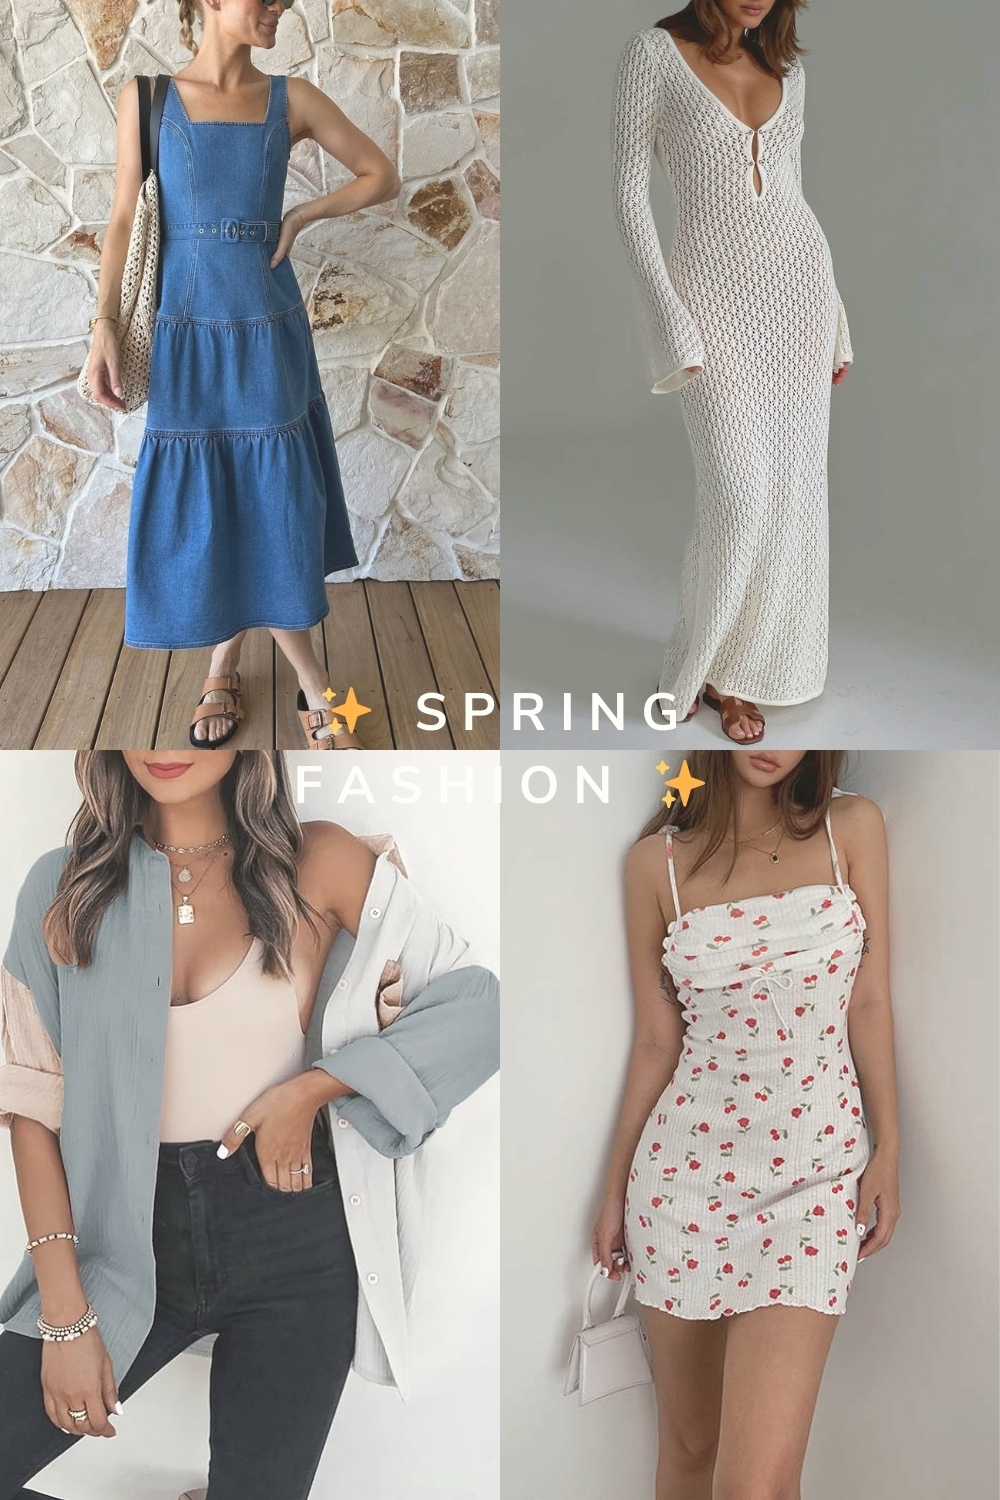 Image showing 4 spring outfit ideas for women